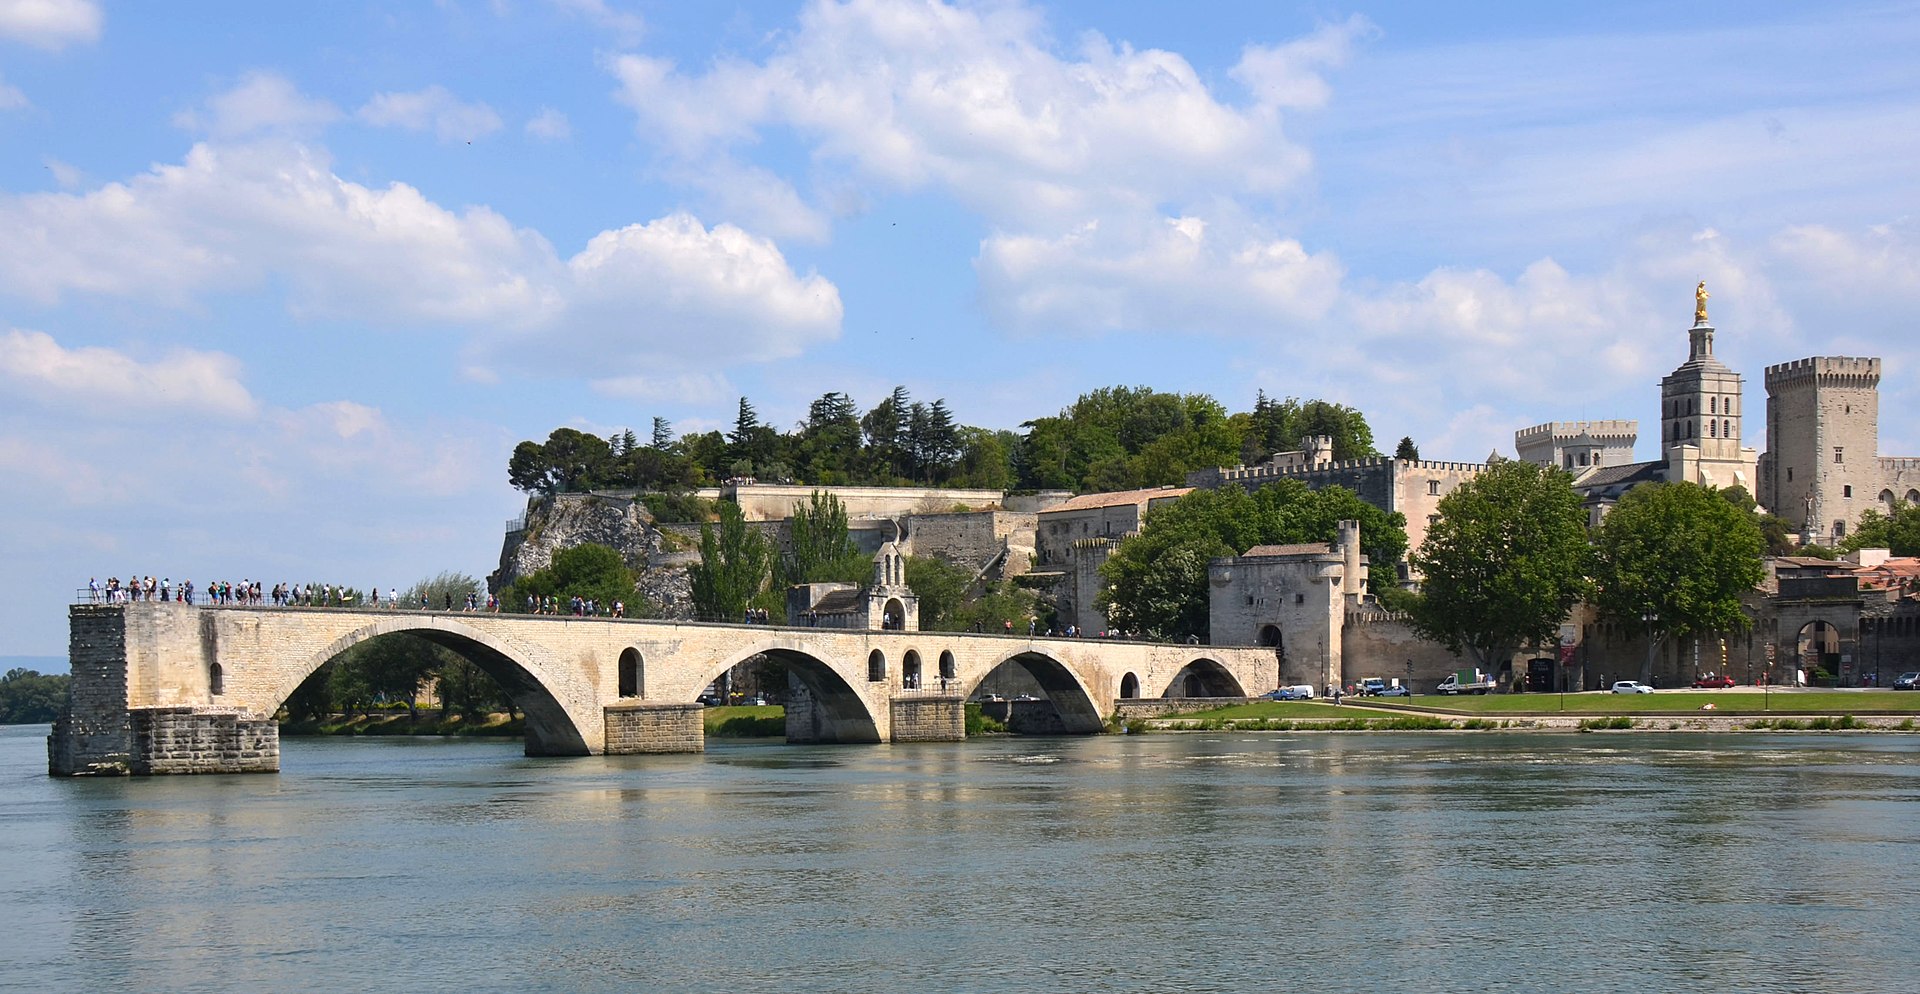 1920px-%22Sur_le_Pont_d%27Avignon_on_y_danse%22_is_the_famous_song%2C_but_now_we_see_only_many_tourist_just_standing_there_-_panoramio.jpg